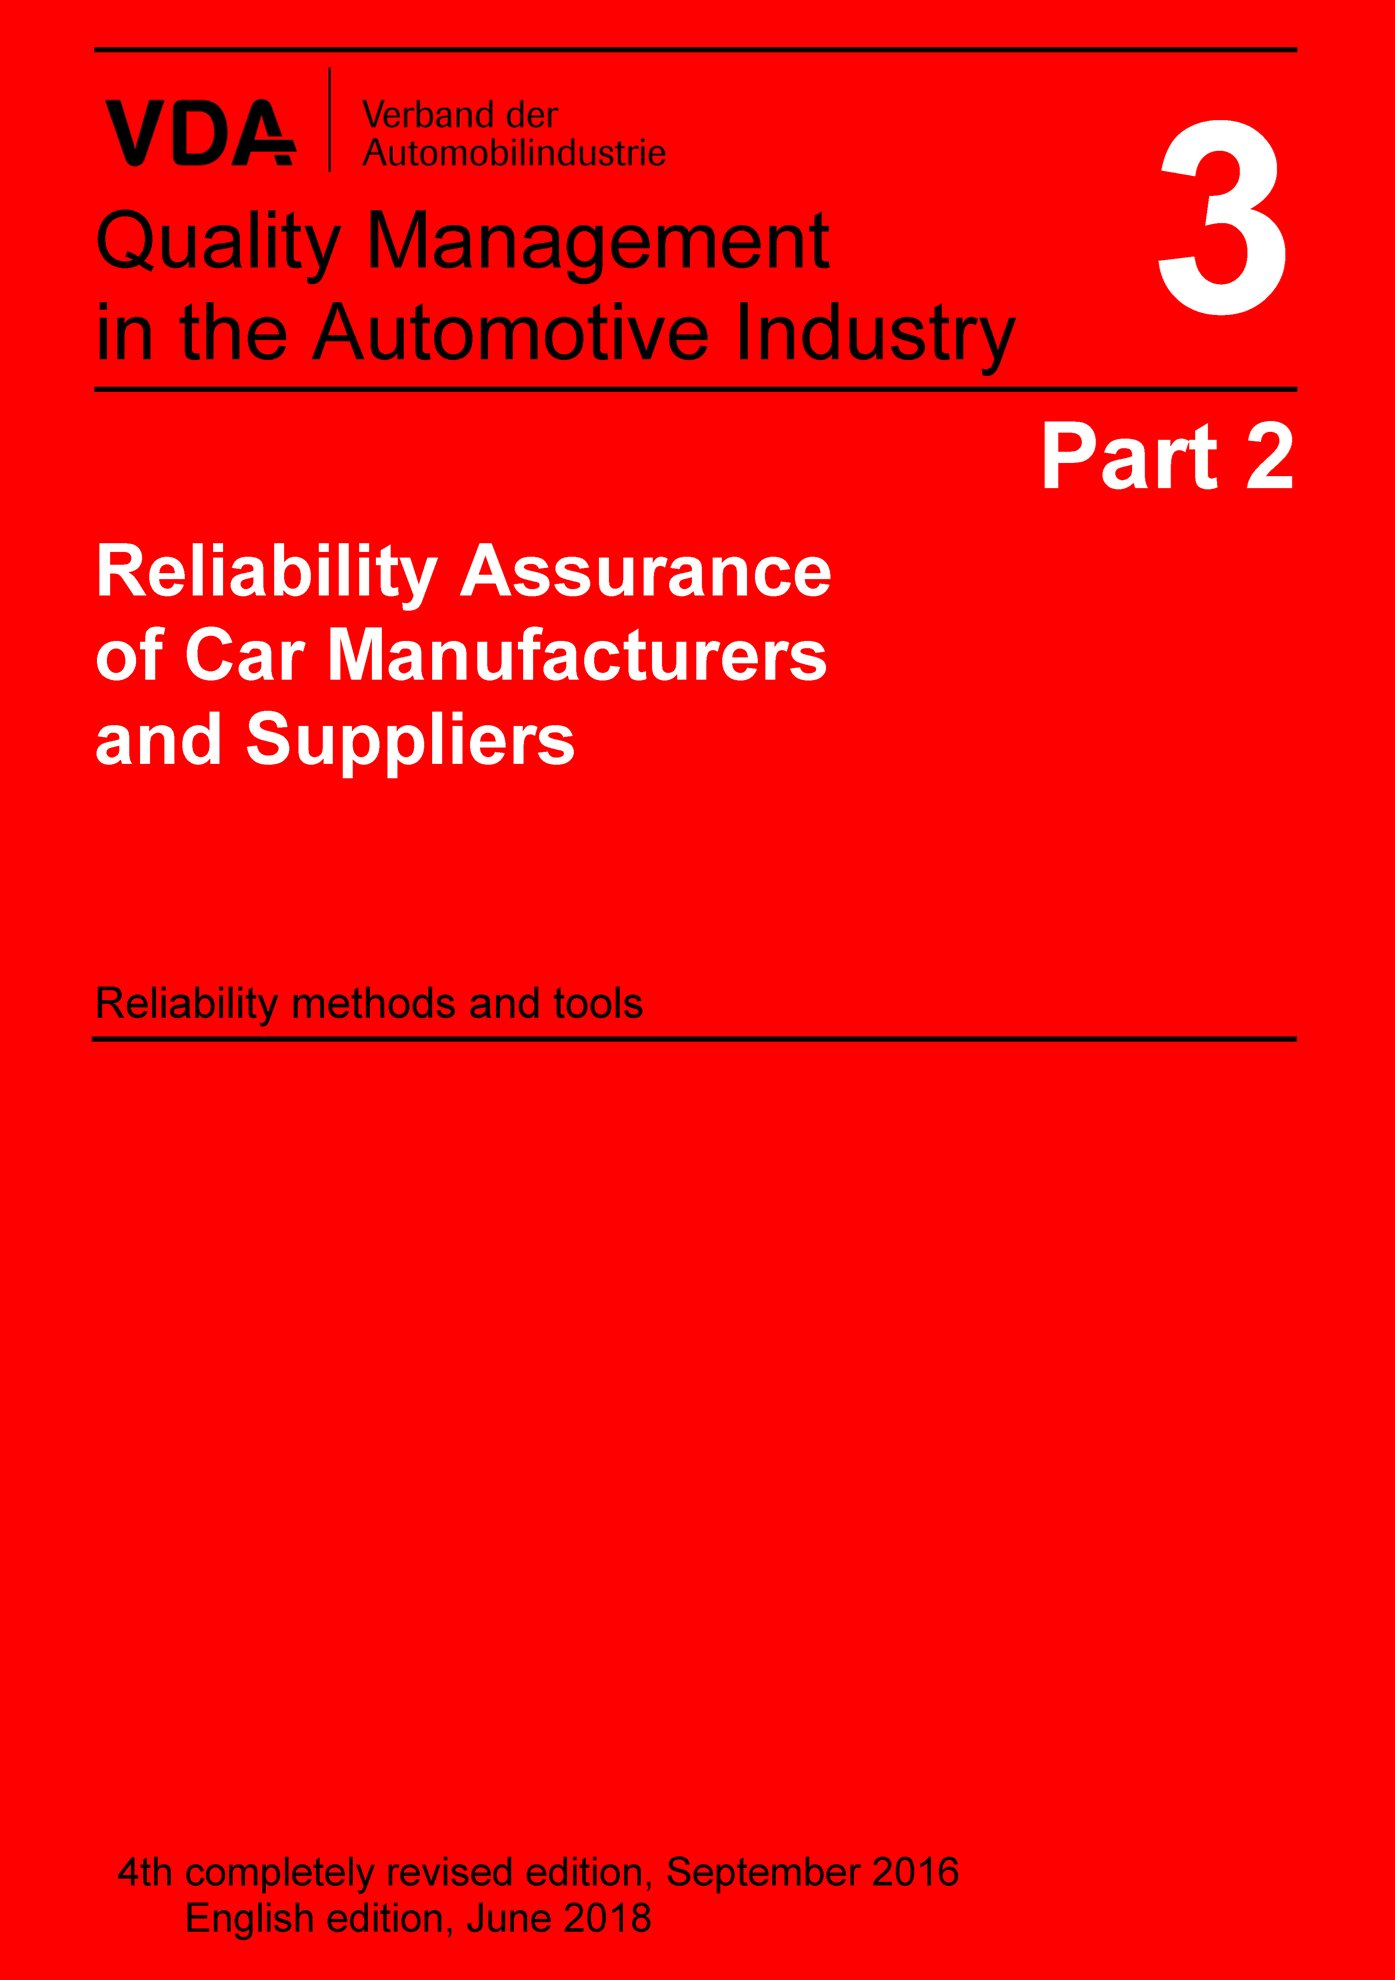 Publications  VDA Volume 3 Part 2, 4th completely revised edition 2016 Reliability Assurance of Car Manufacturers and Suppliers 
 Reliability methods and tools 1.1.2016 preview